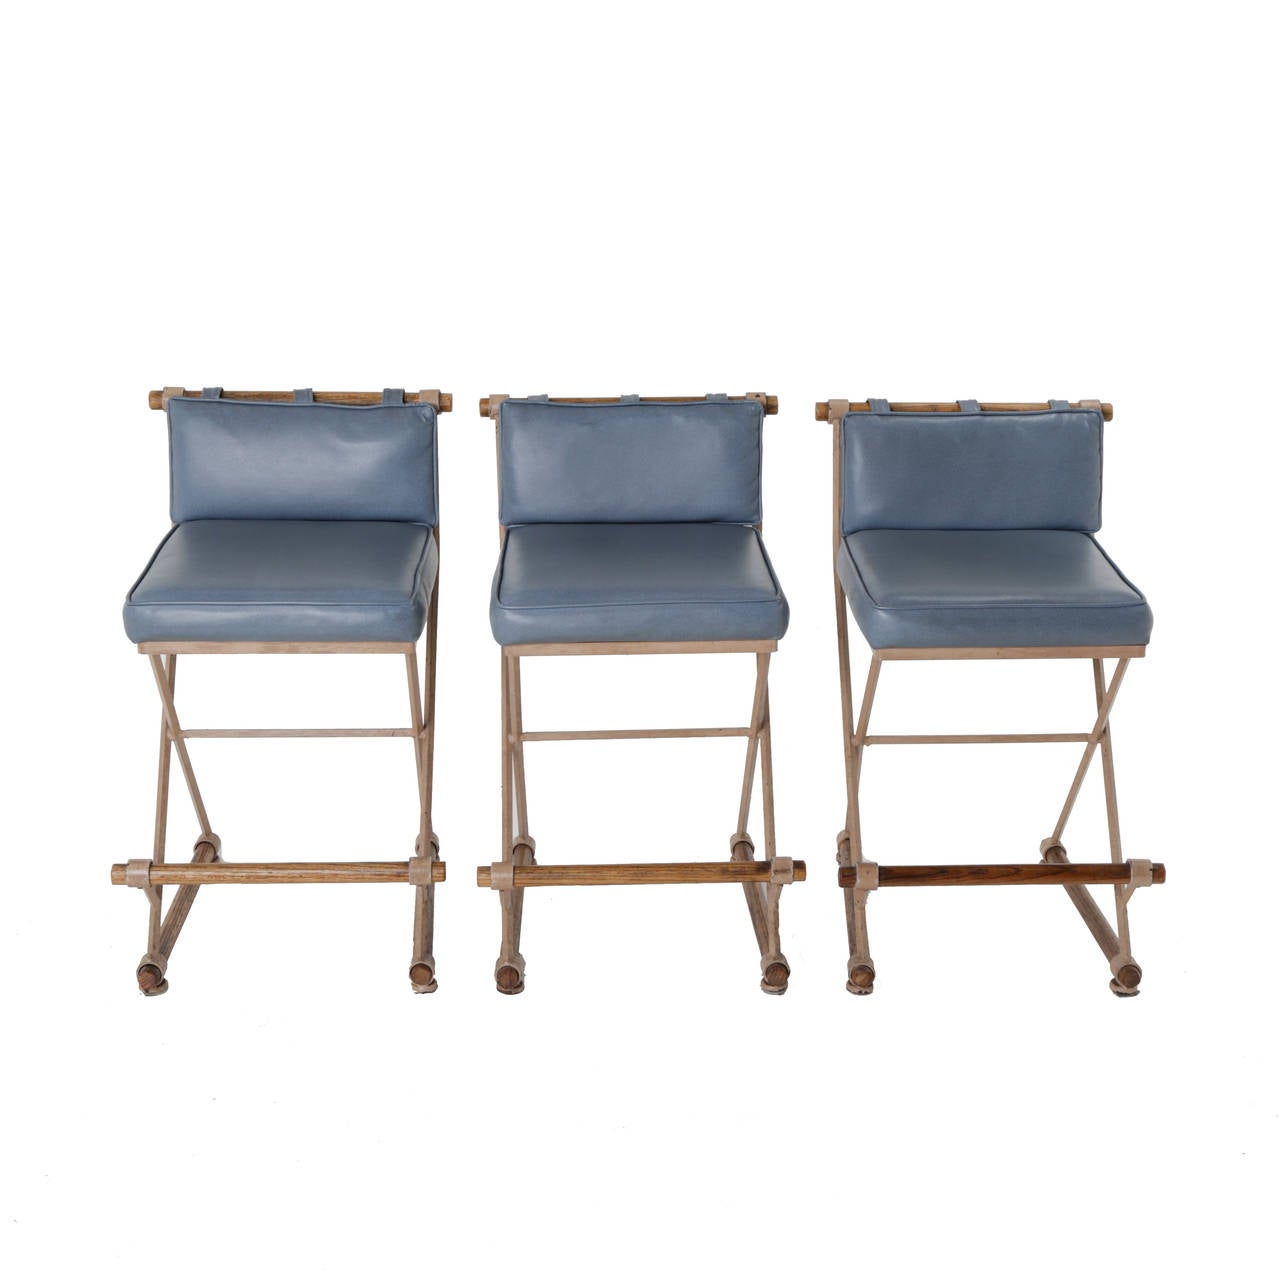 Three campaign style stools by Cleo Baldon with painted wrought iron bases and solid Oak dowel footrests and details. Upholstered in Blue Vinyl; Counter Height.

Many pieces are stored in our warehouse, so please click on CONTACT DEALER under our